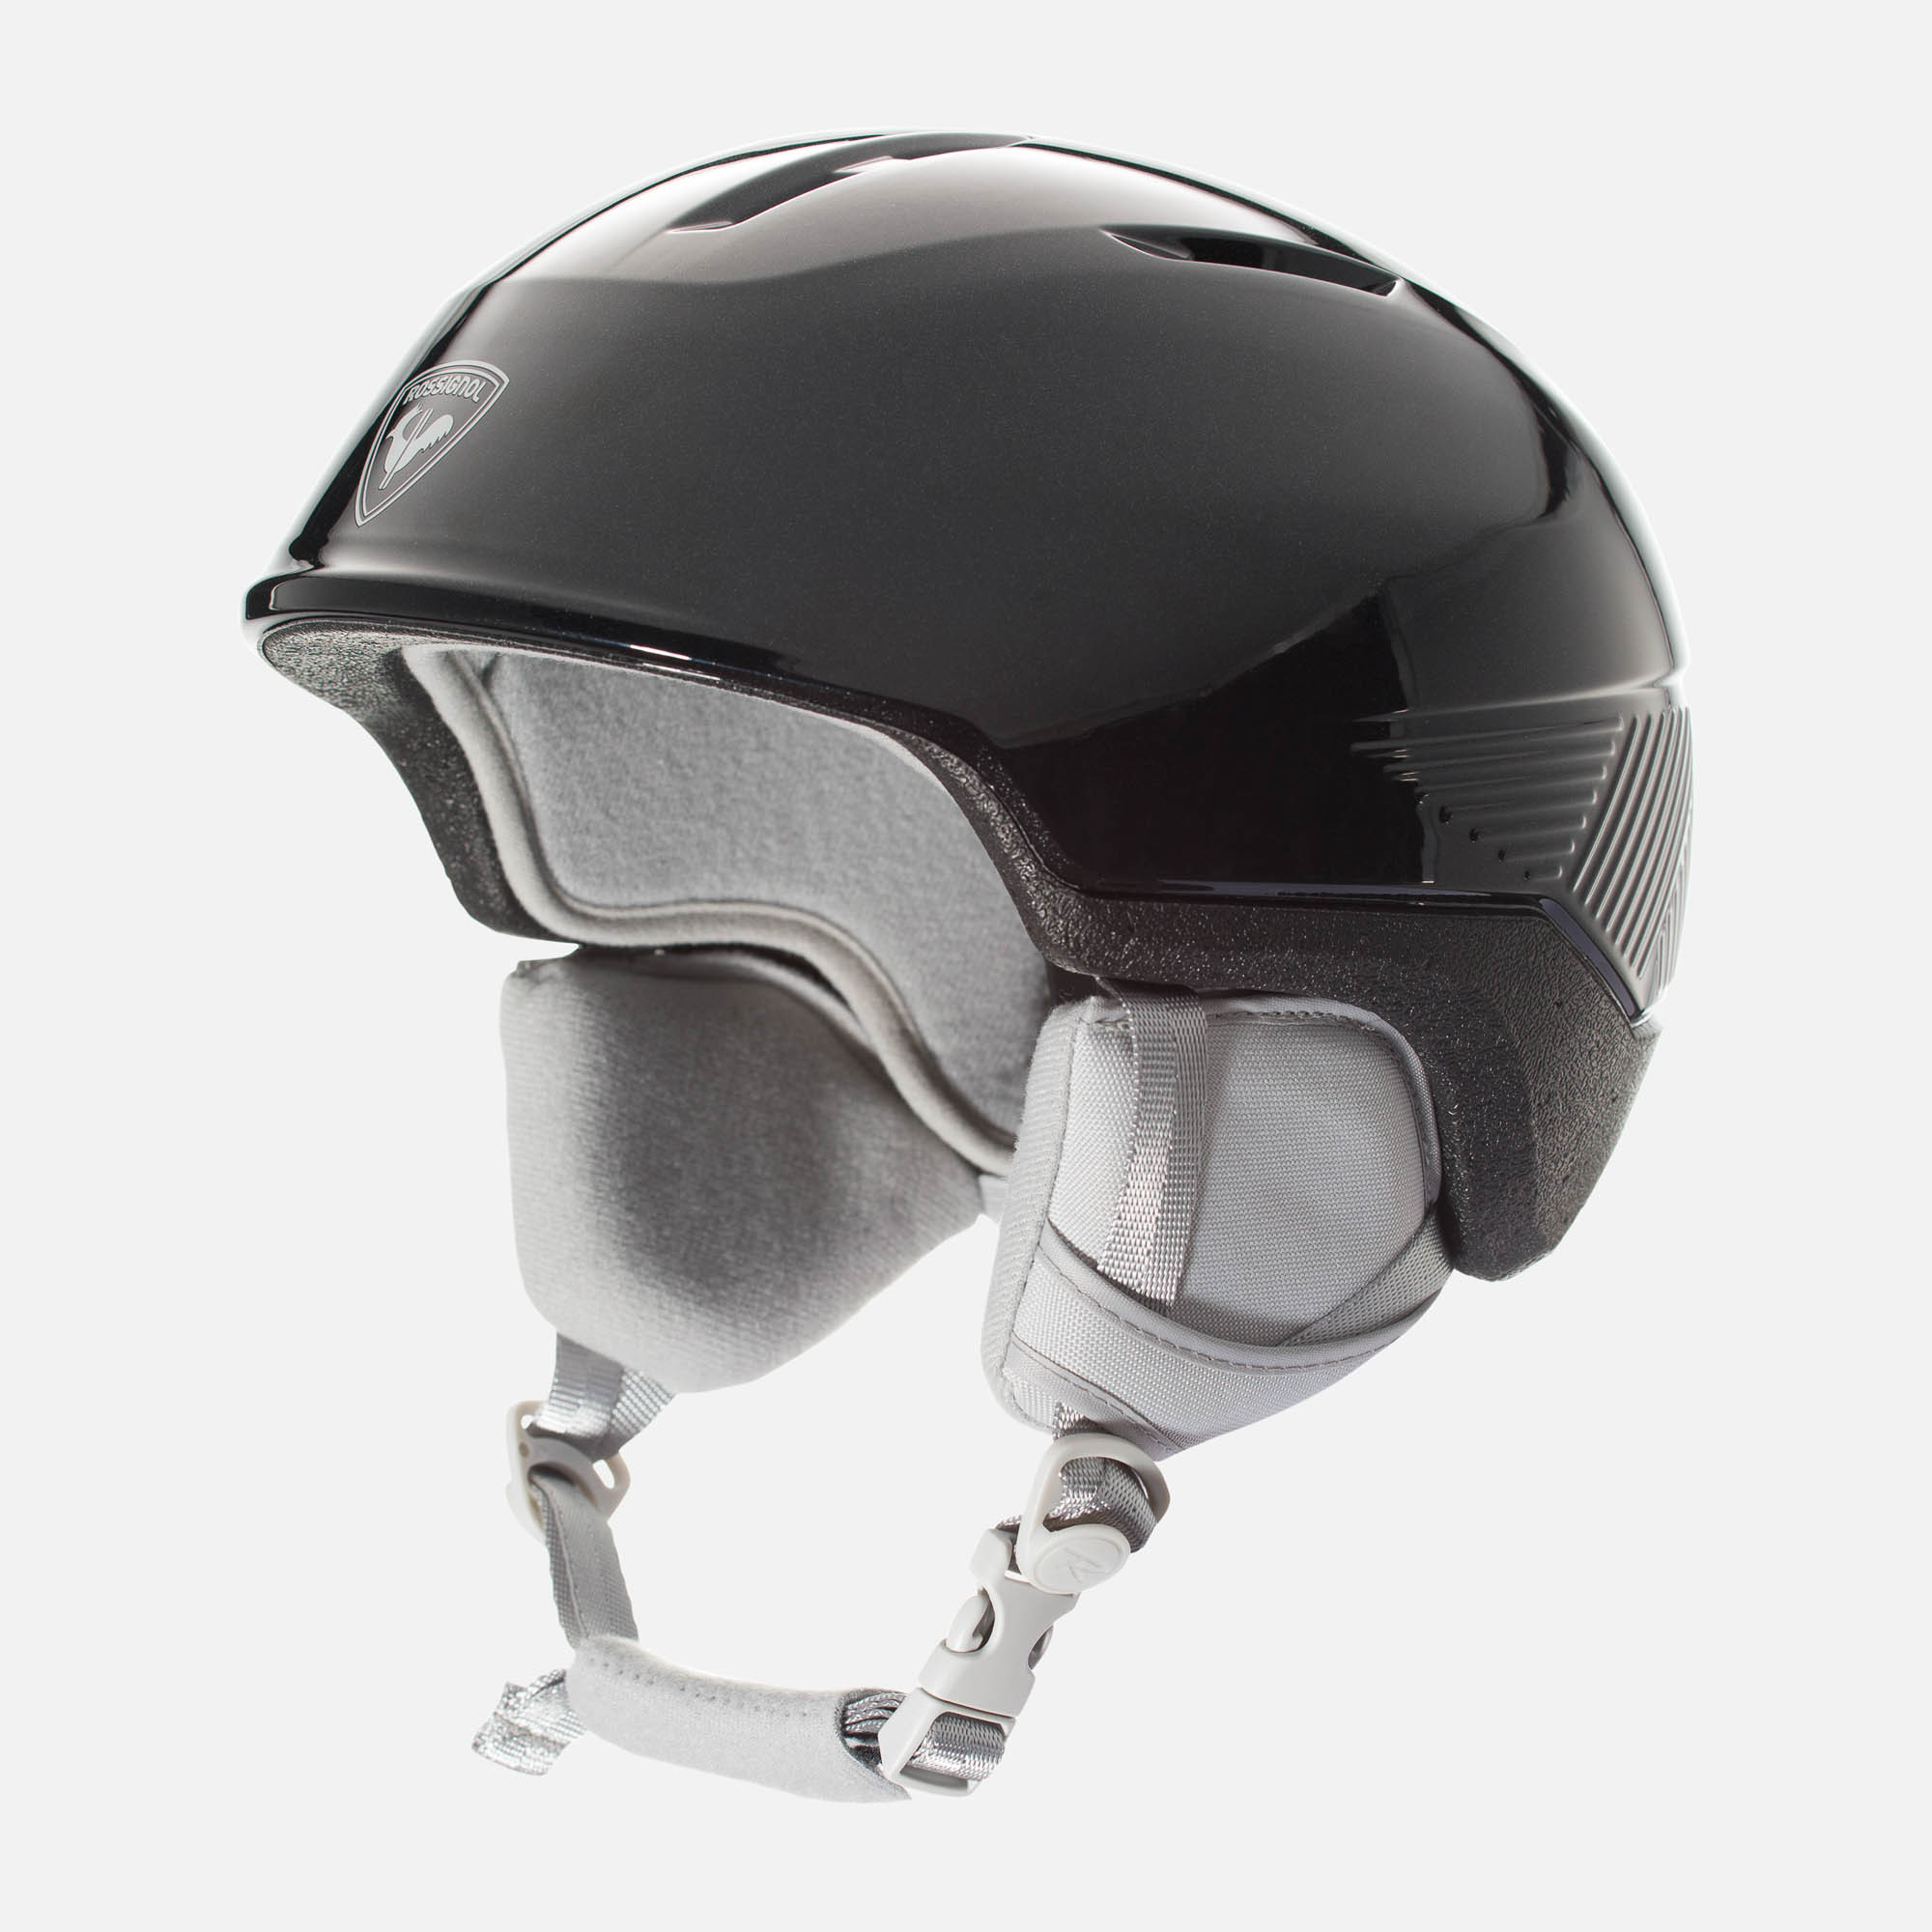 Casco Fit Impacts para mujer